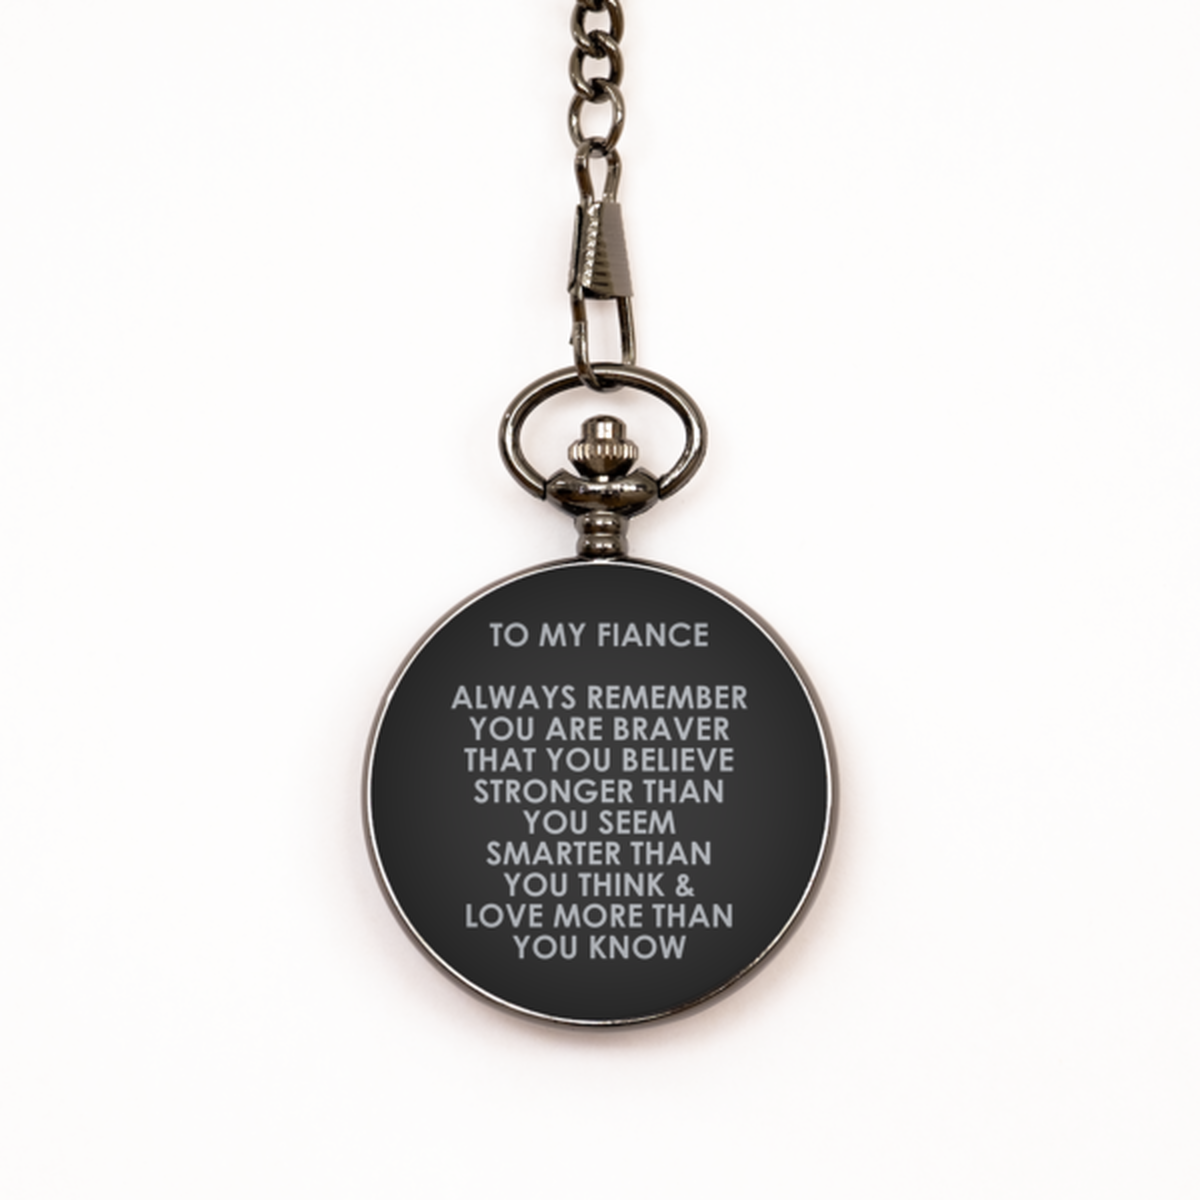 To My Fiance Black Pocket Watch, Love More Than You Know, Valentines  Gifts For Fiance From Fiancee, Birthday Gifts For Men